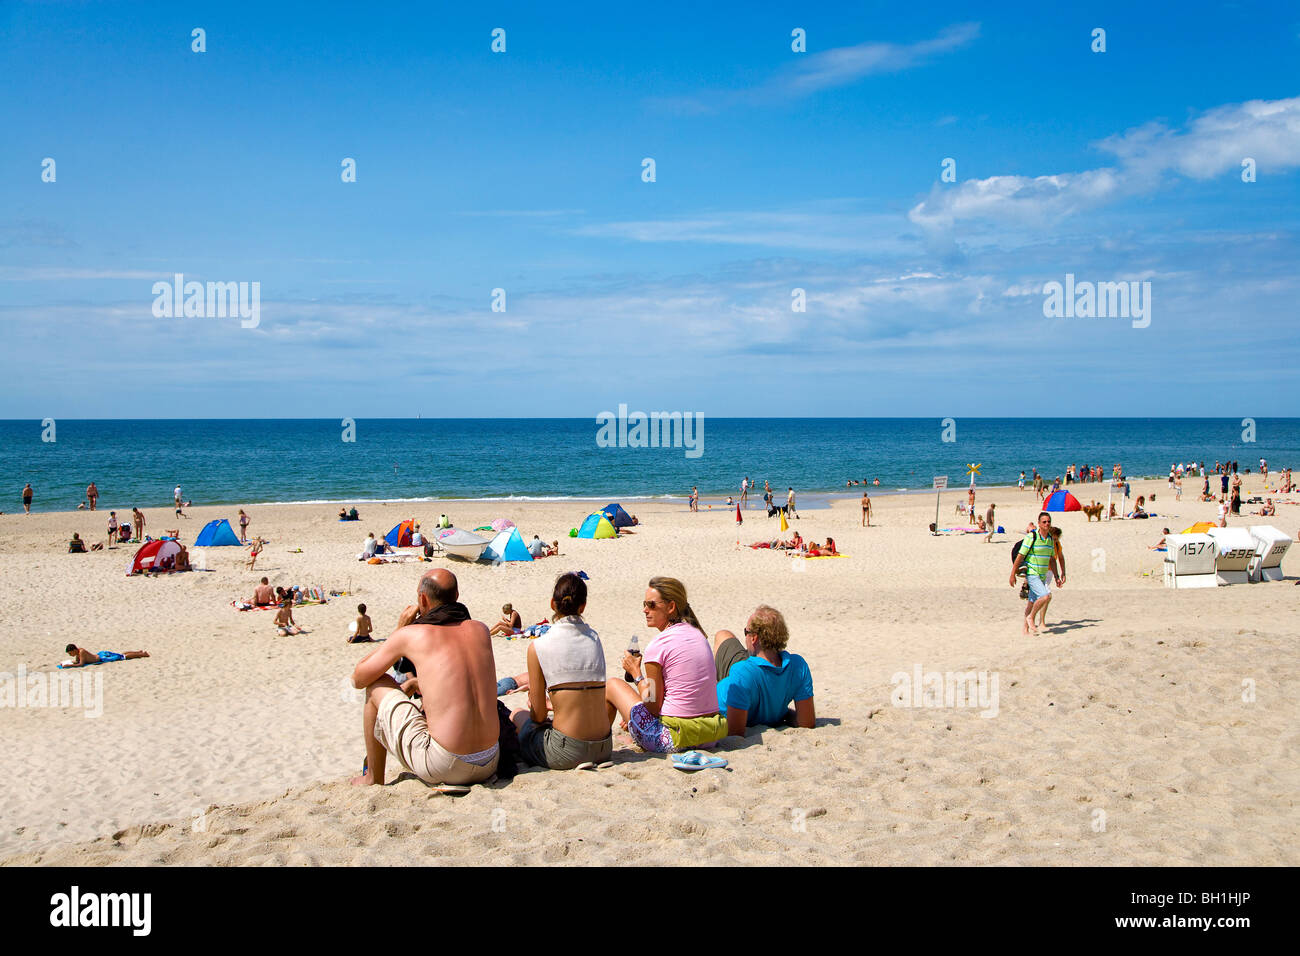 People on beach, Wenningstedt, Sylt Island, Schleswig-Holstein, Germany Stock Photo